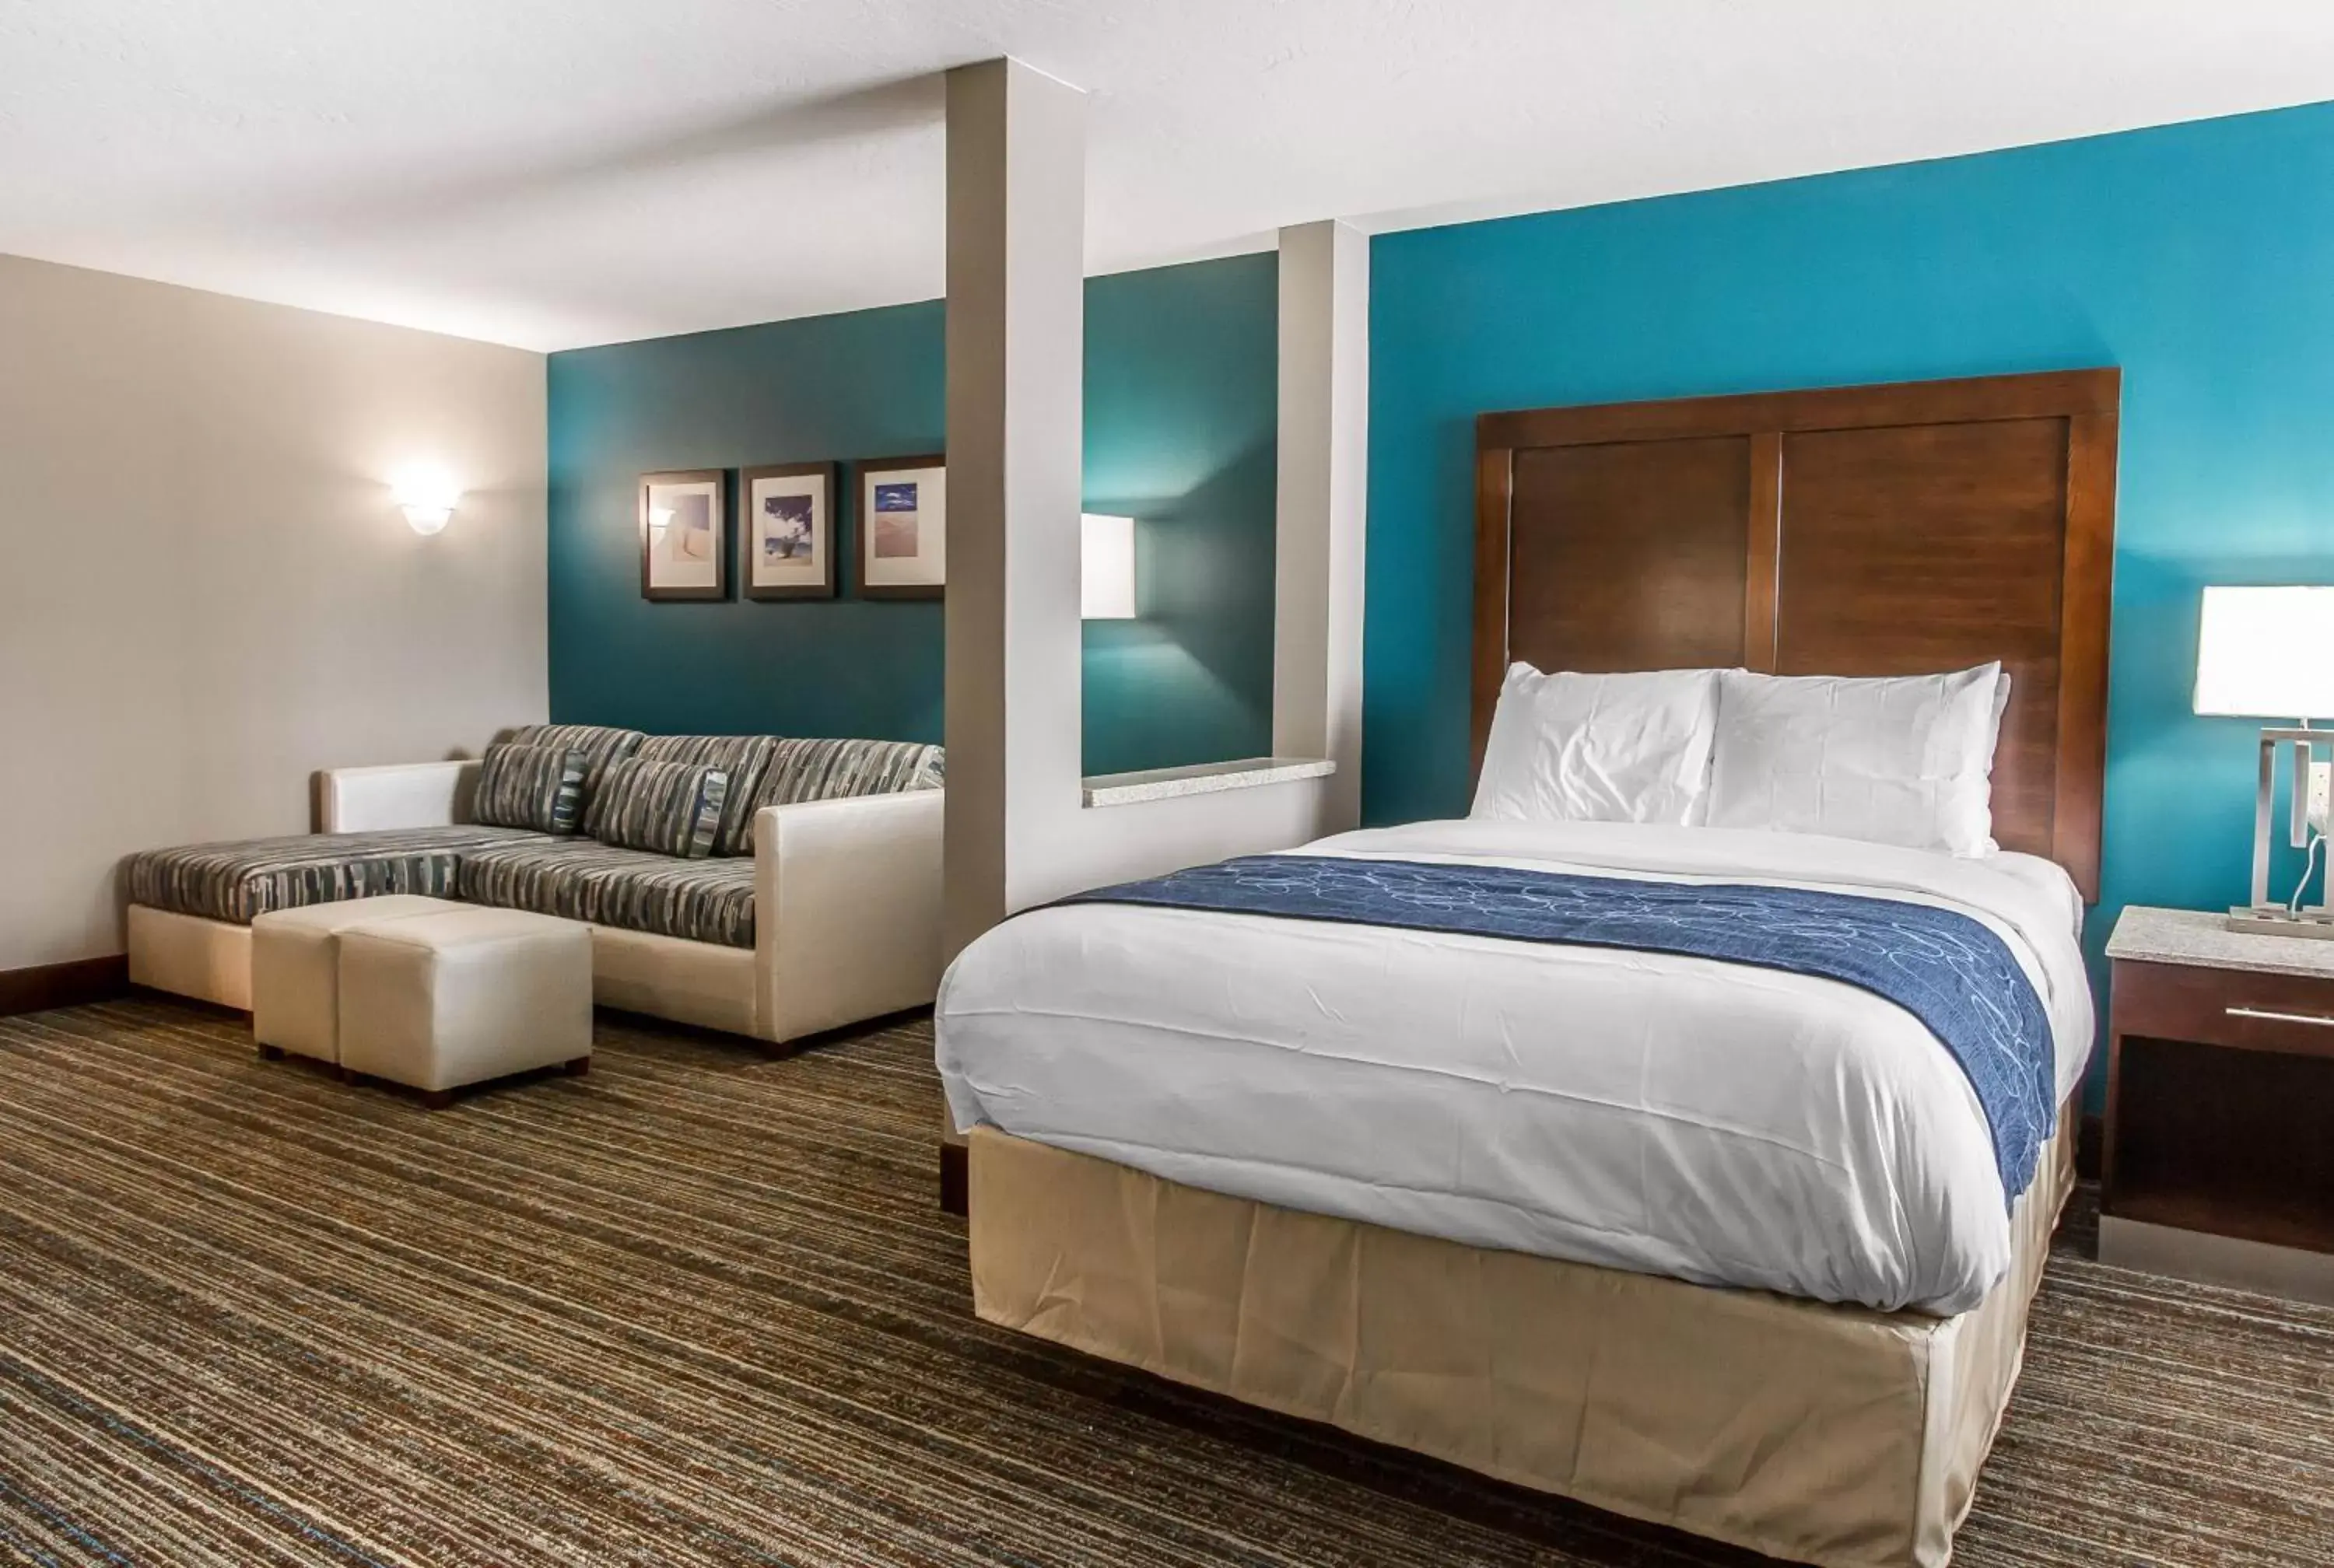 Bed, Room Photo in Comfort Suites of Las Cruces I-25 North